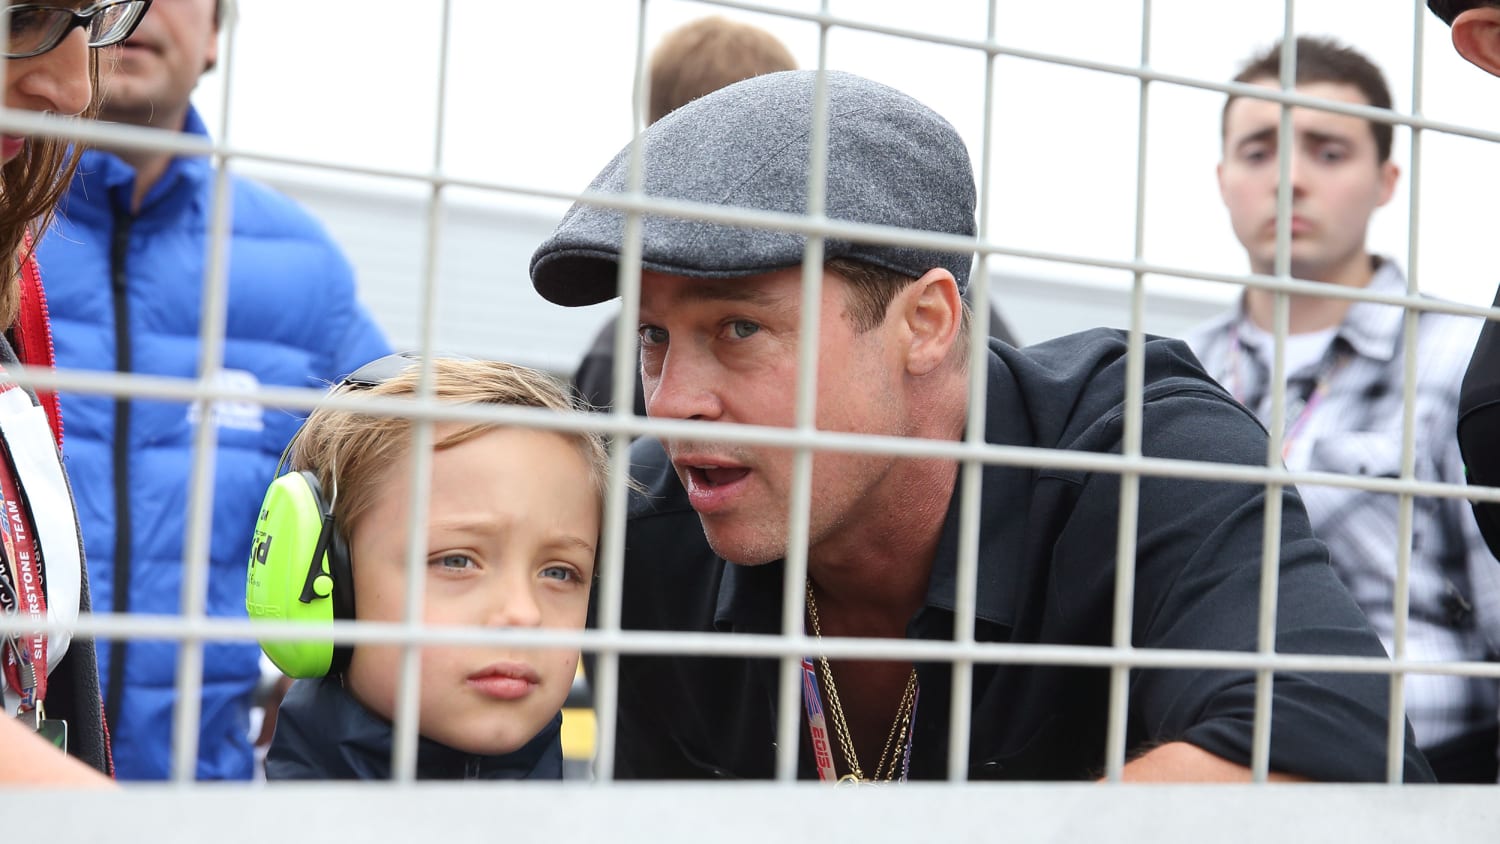 Brad Pitt shares father-son day with Knox at MotoGP British Grand Prix - TODAY.com2500 x 1407